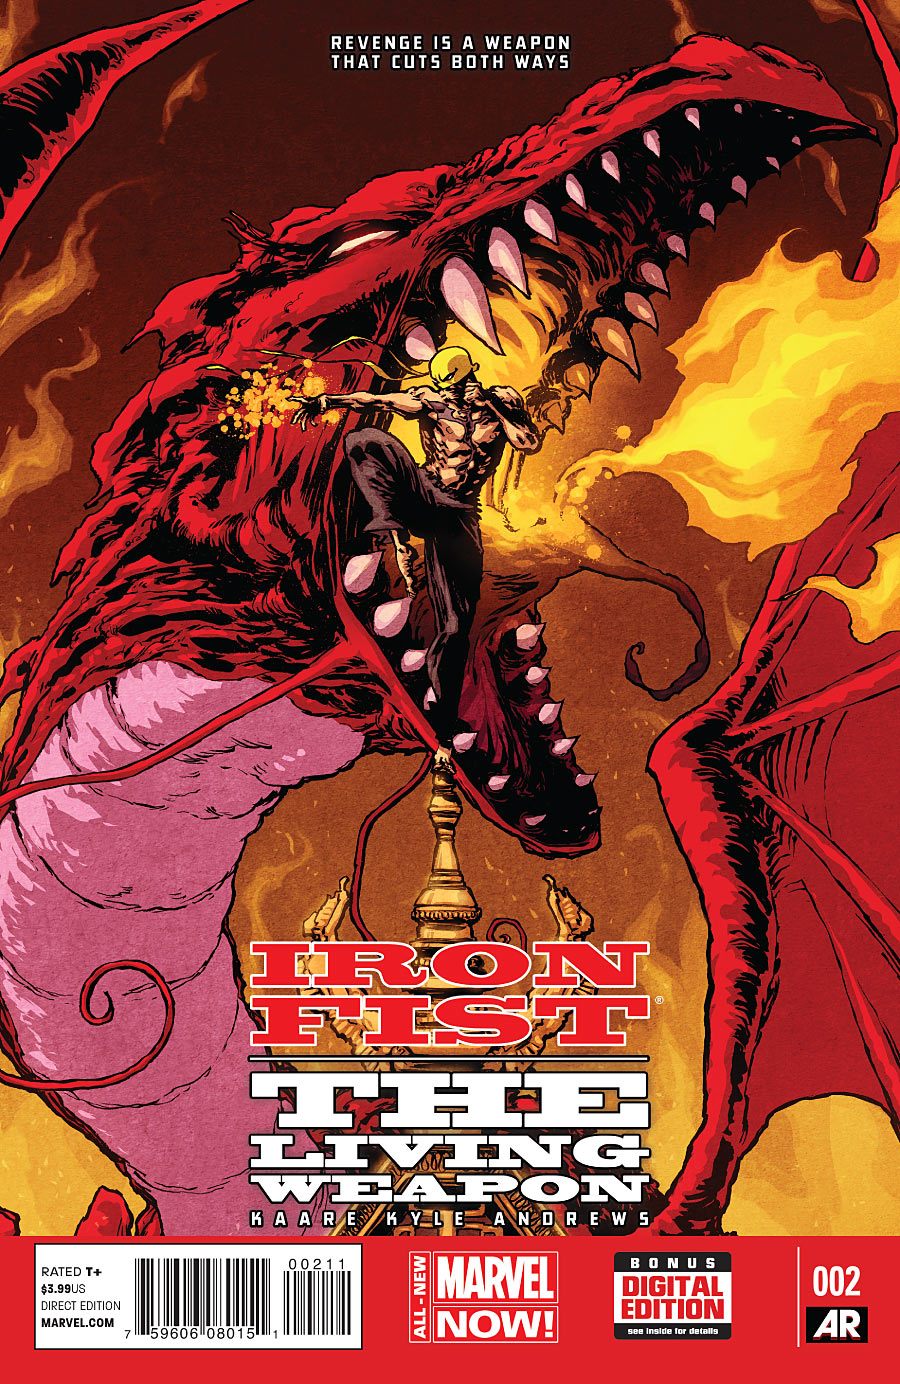 Iron Fist: The Living Weapon #1 - Rage: Part One Issue